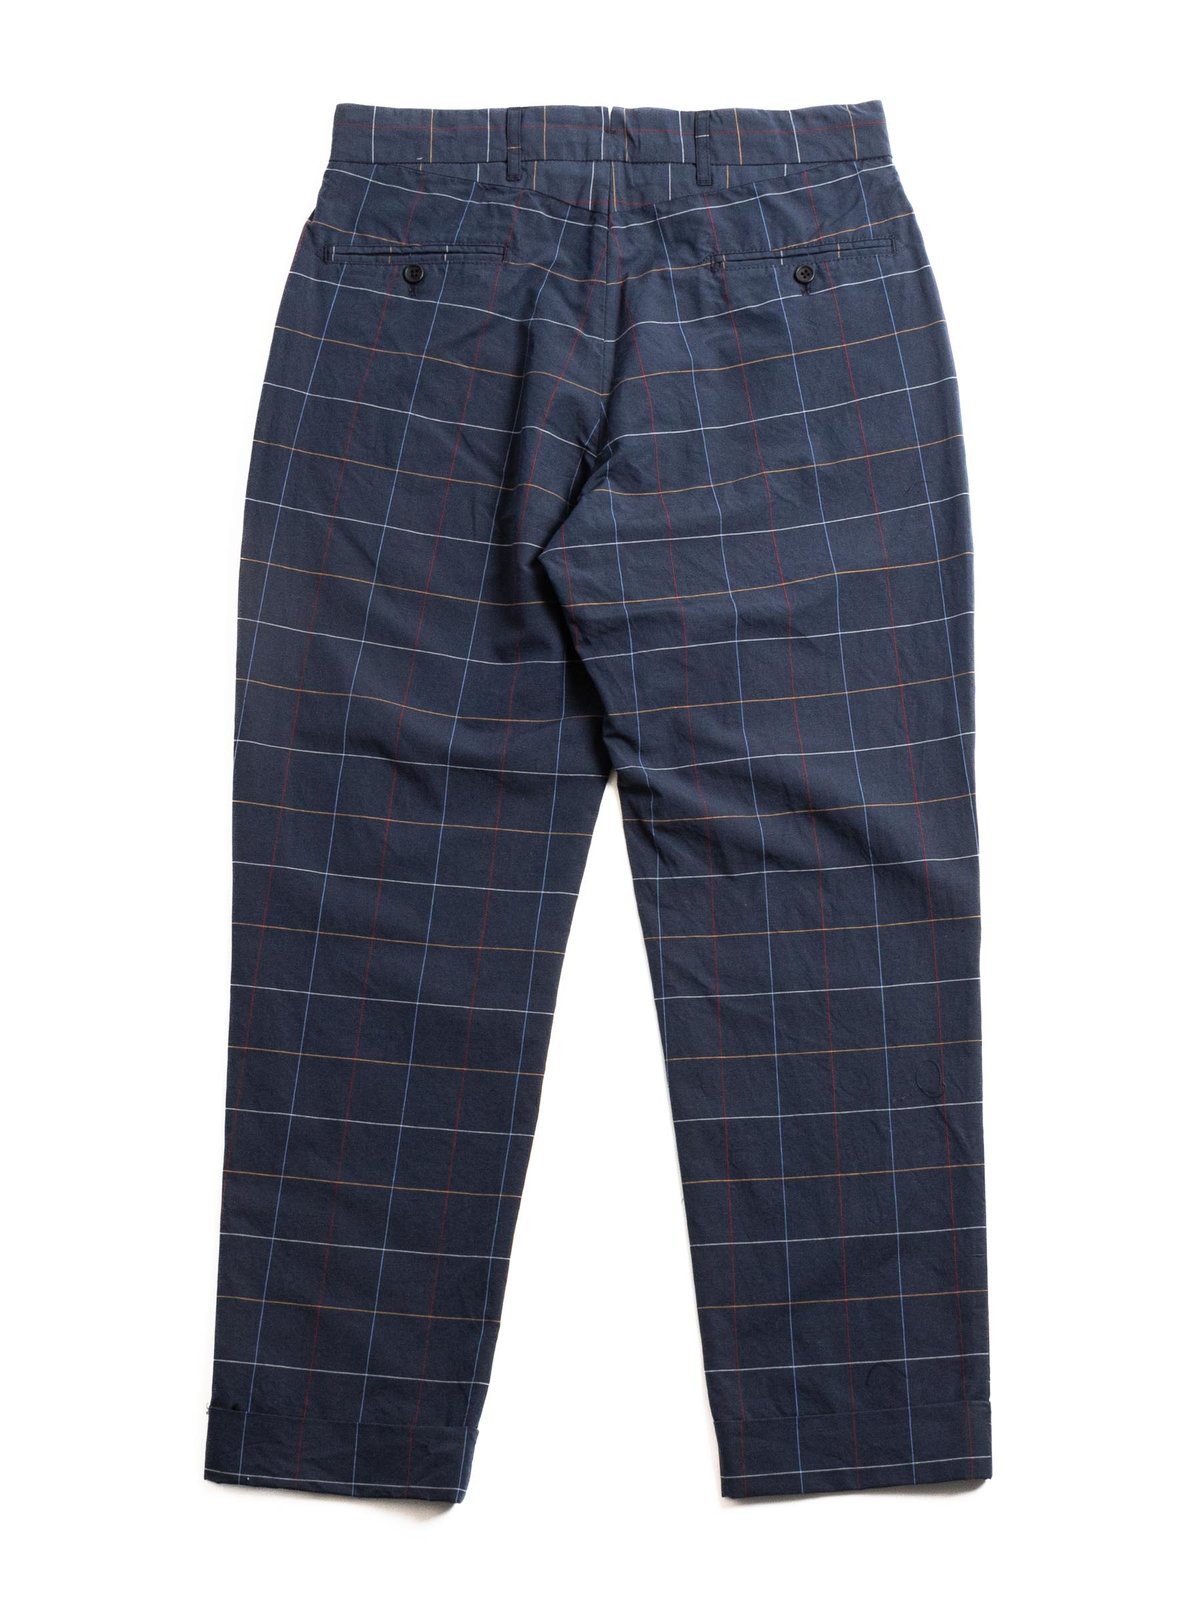 ANDOVER PANT NAVY CL WINDOWPANE - Image 6